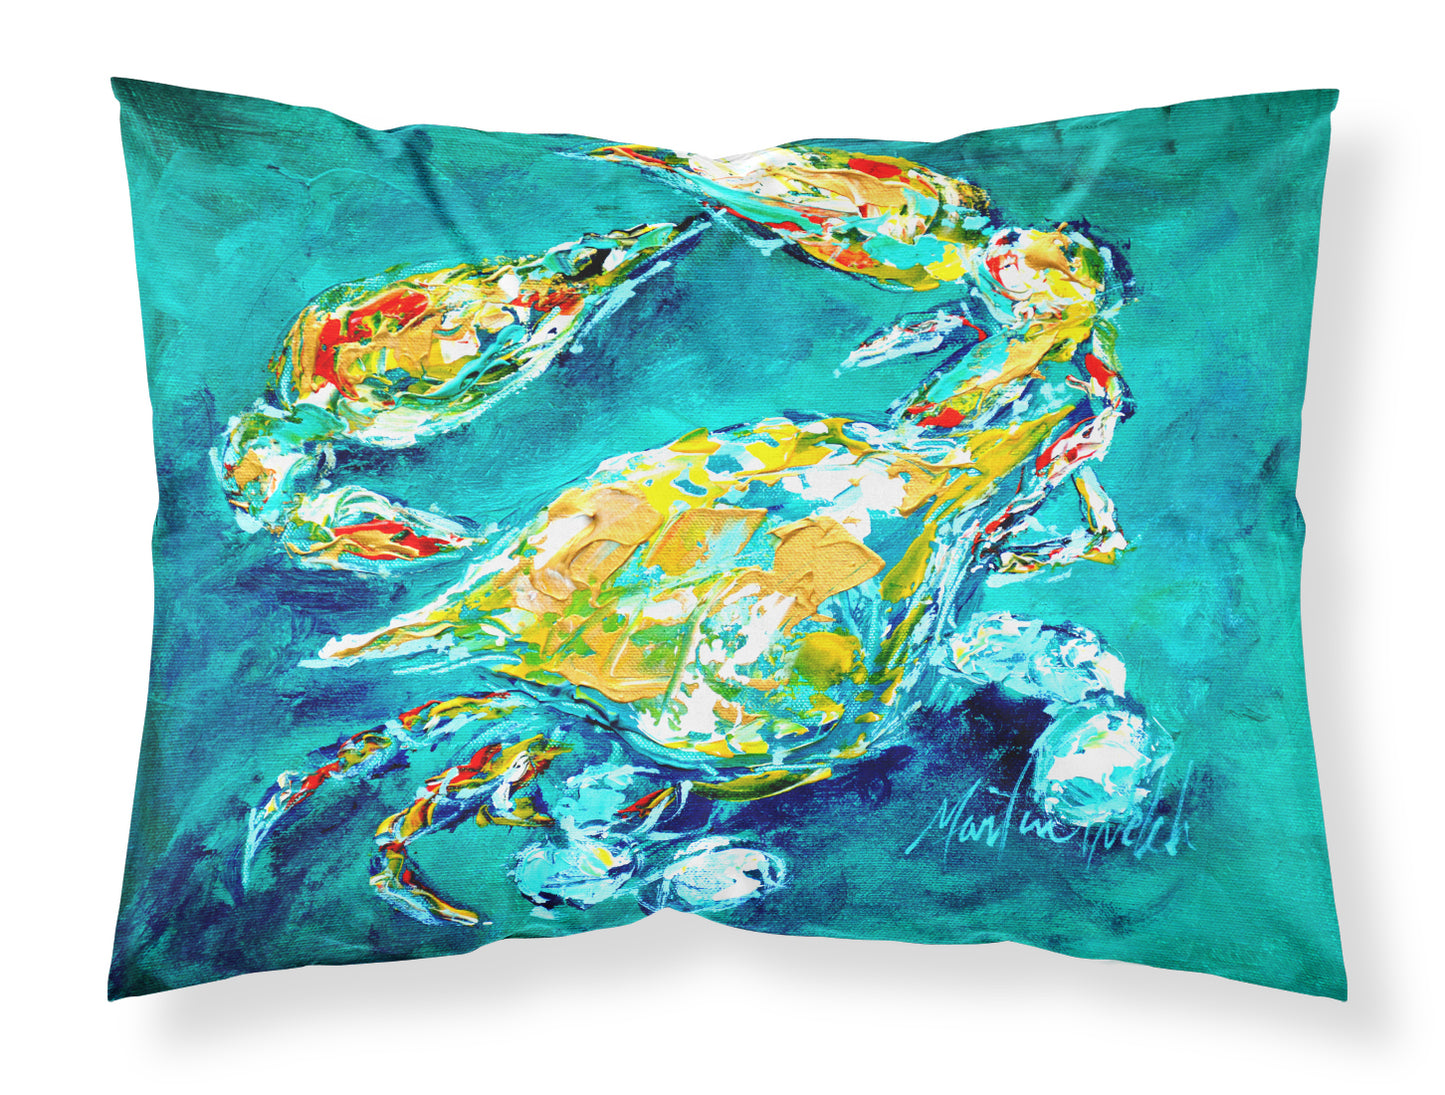 Buy this By Chance Crab in Aqua blue Fabric Standard Pillowcase